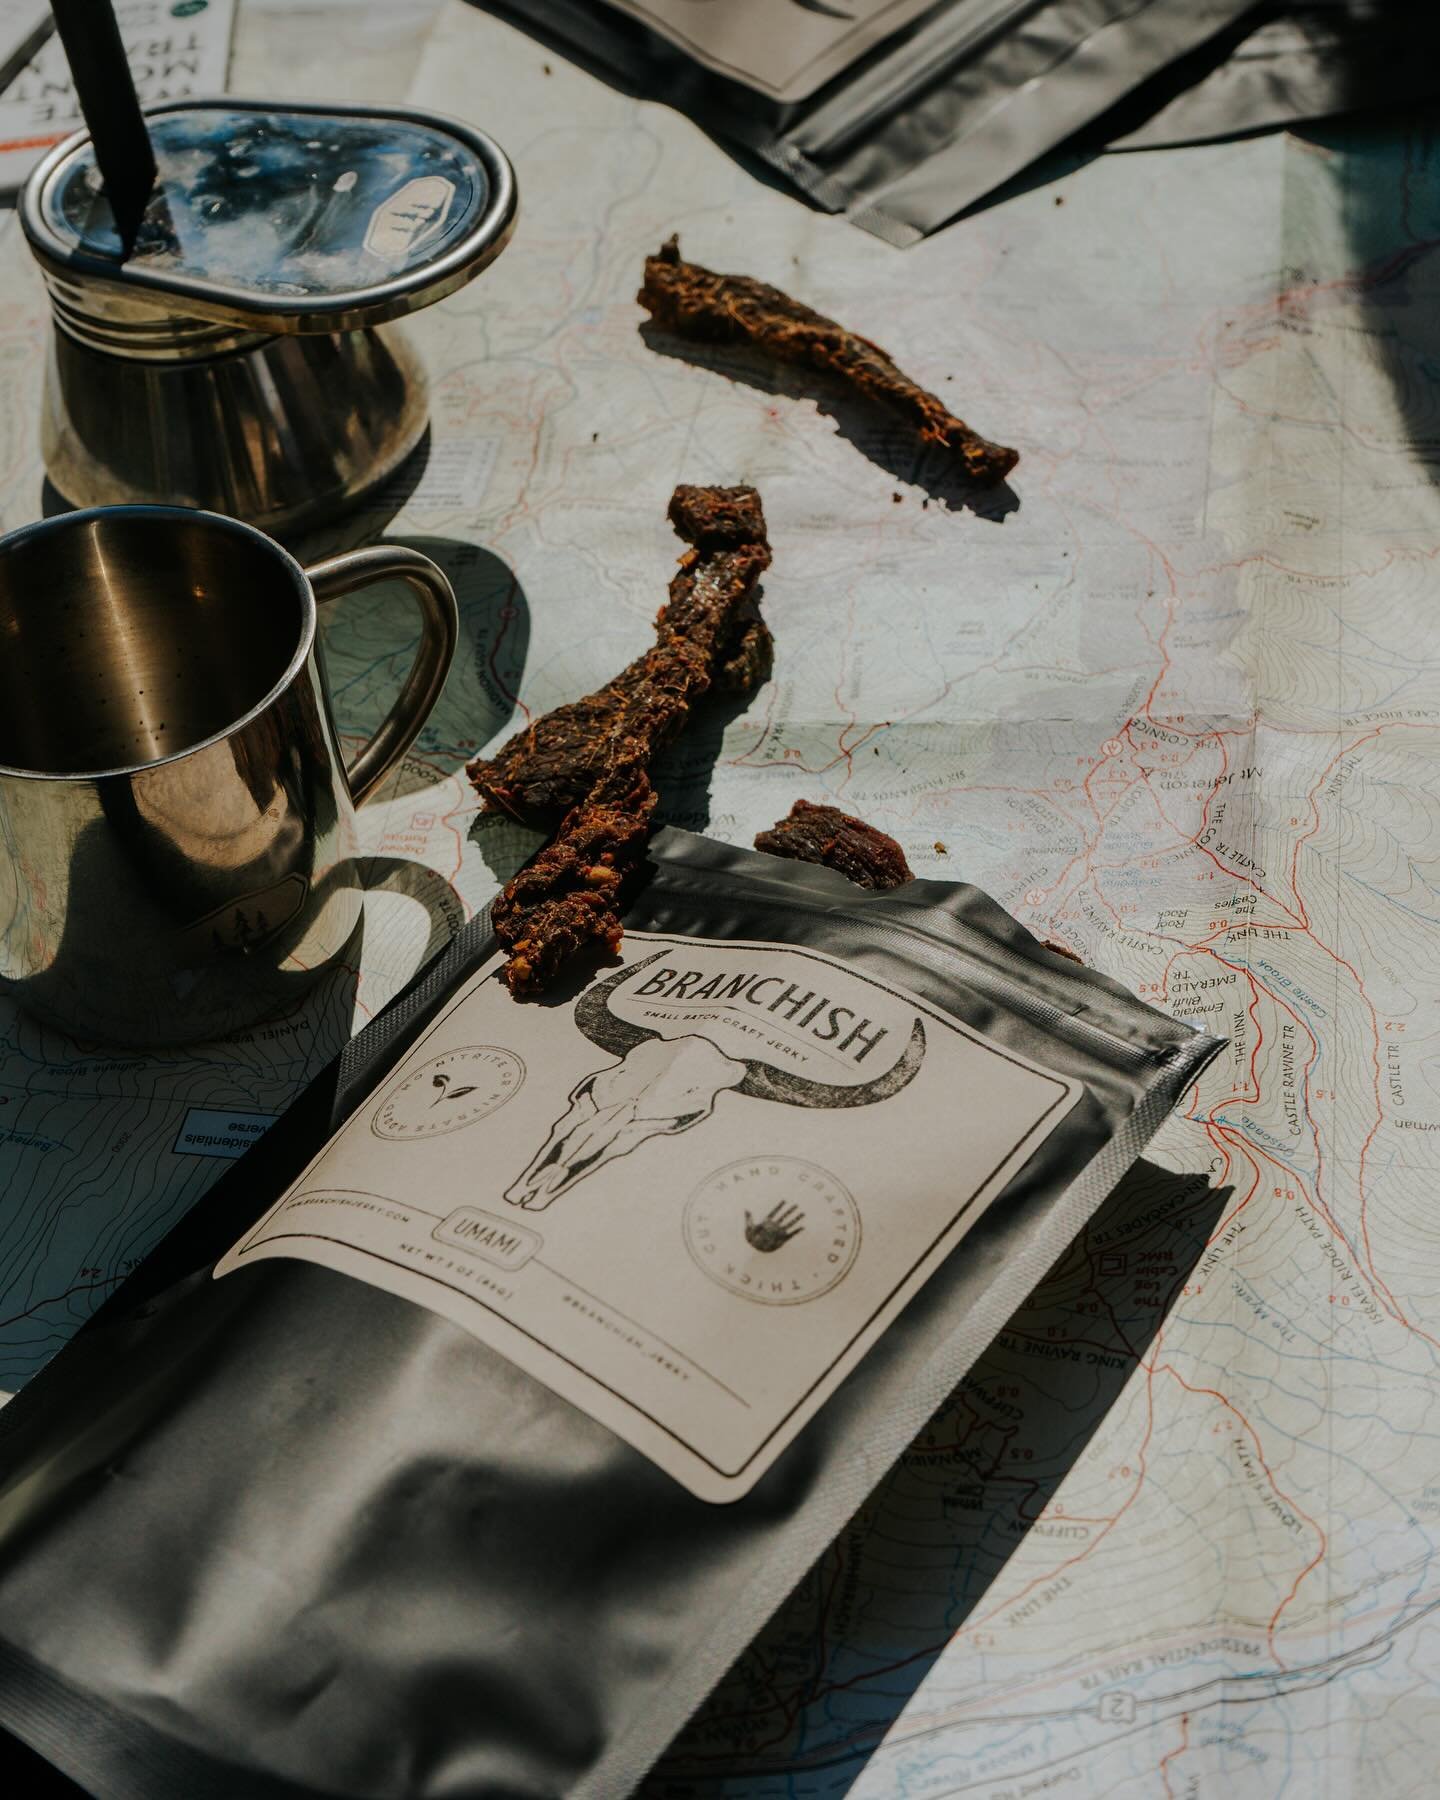 Hit the trail, take the long road, or embark on your next big adventure with the perfect snack in tow&mdash;@branchish_jerky

Packed with protein and ready to go wherever you go!

Make sure you tag us in your next adventure #myBranchish. We love seei